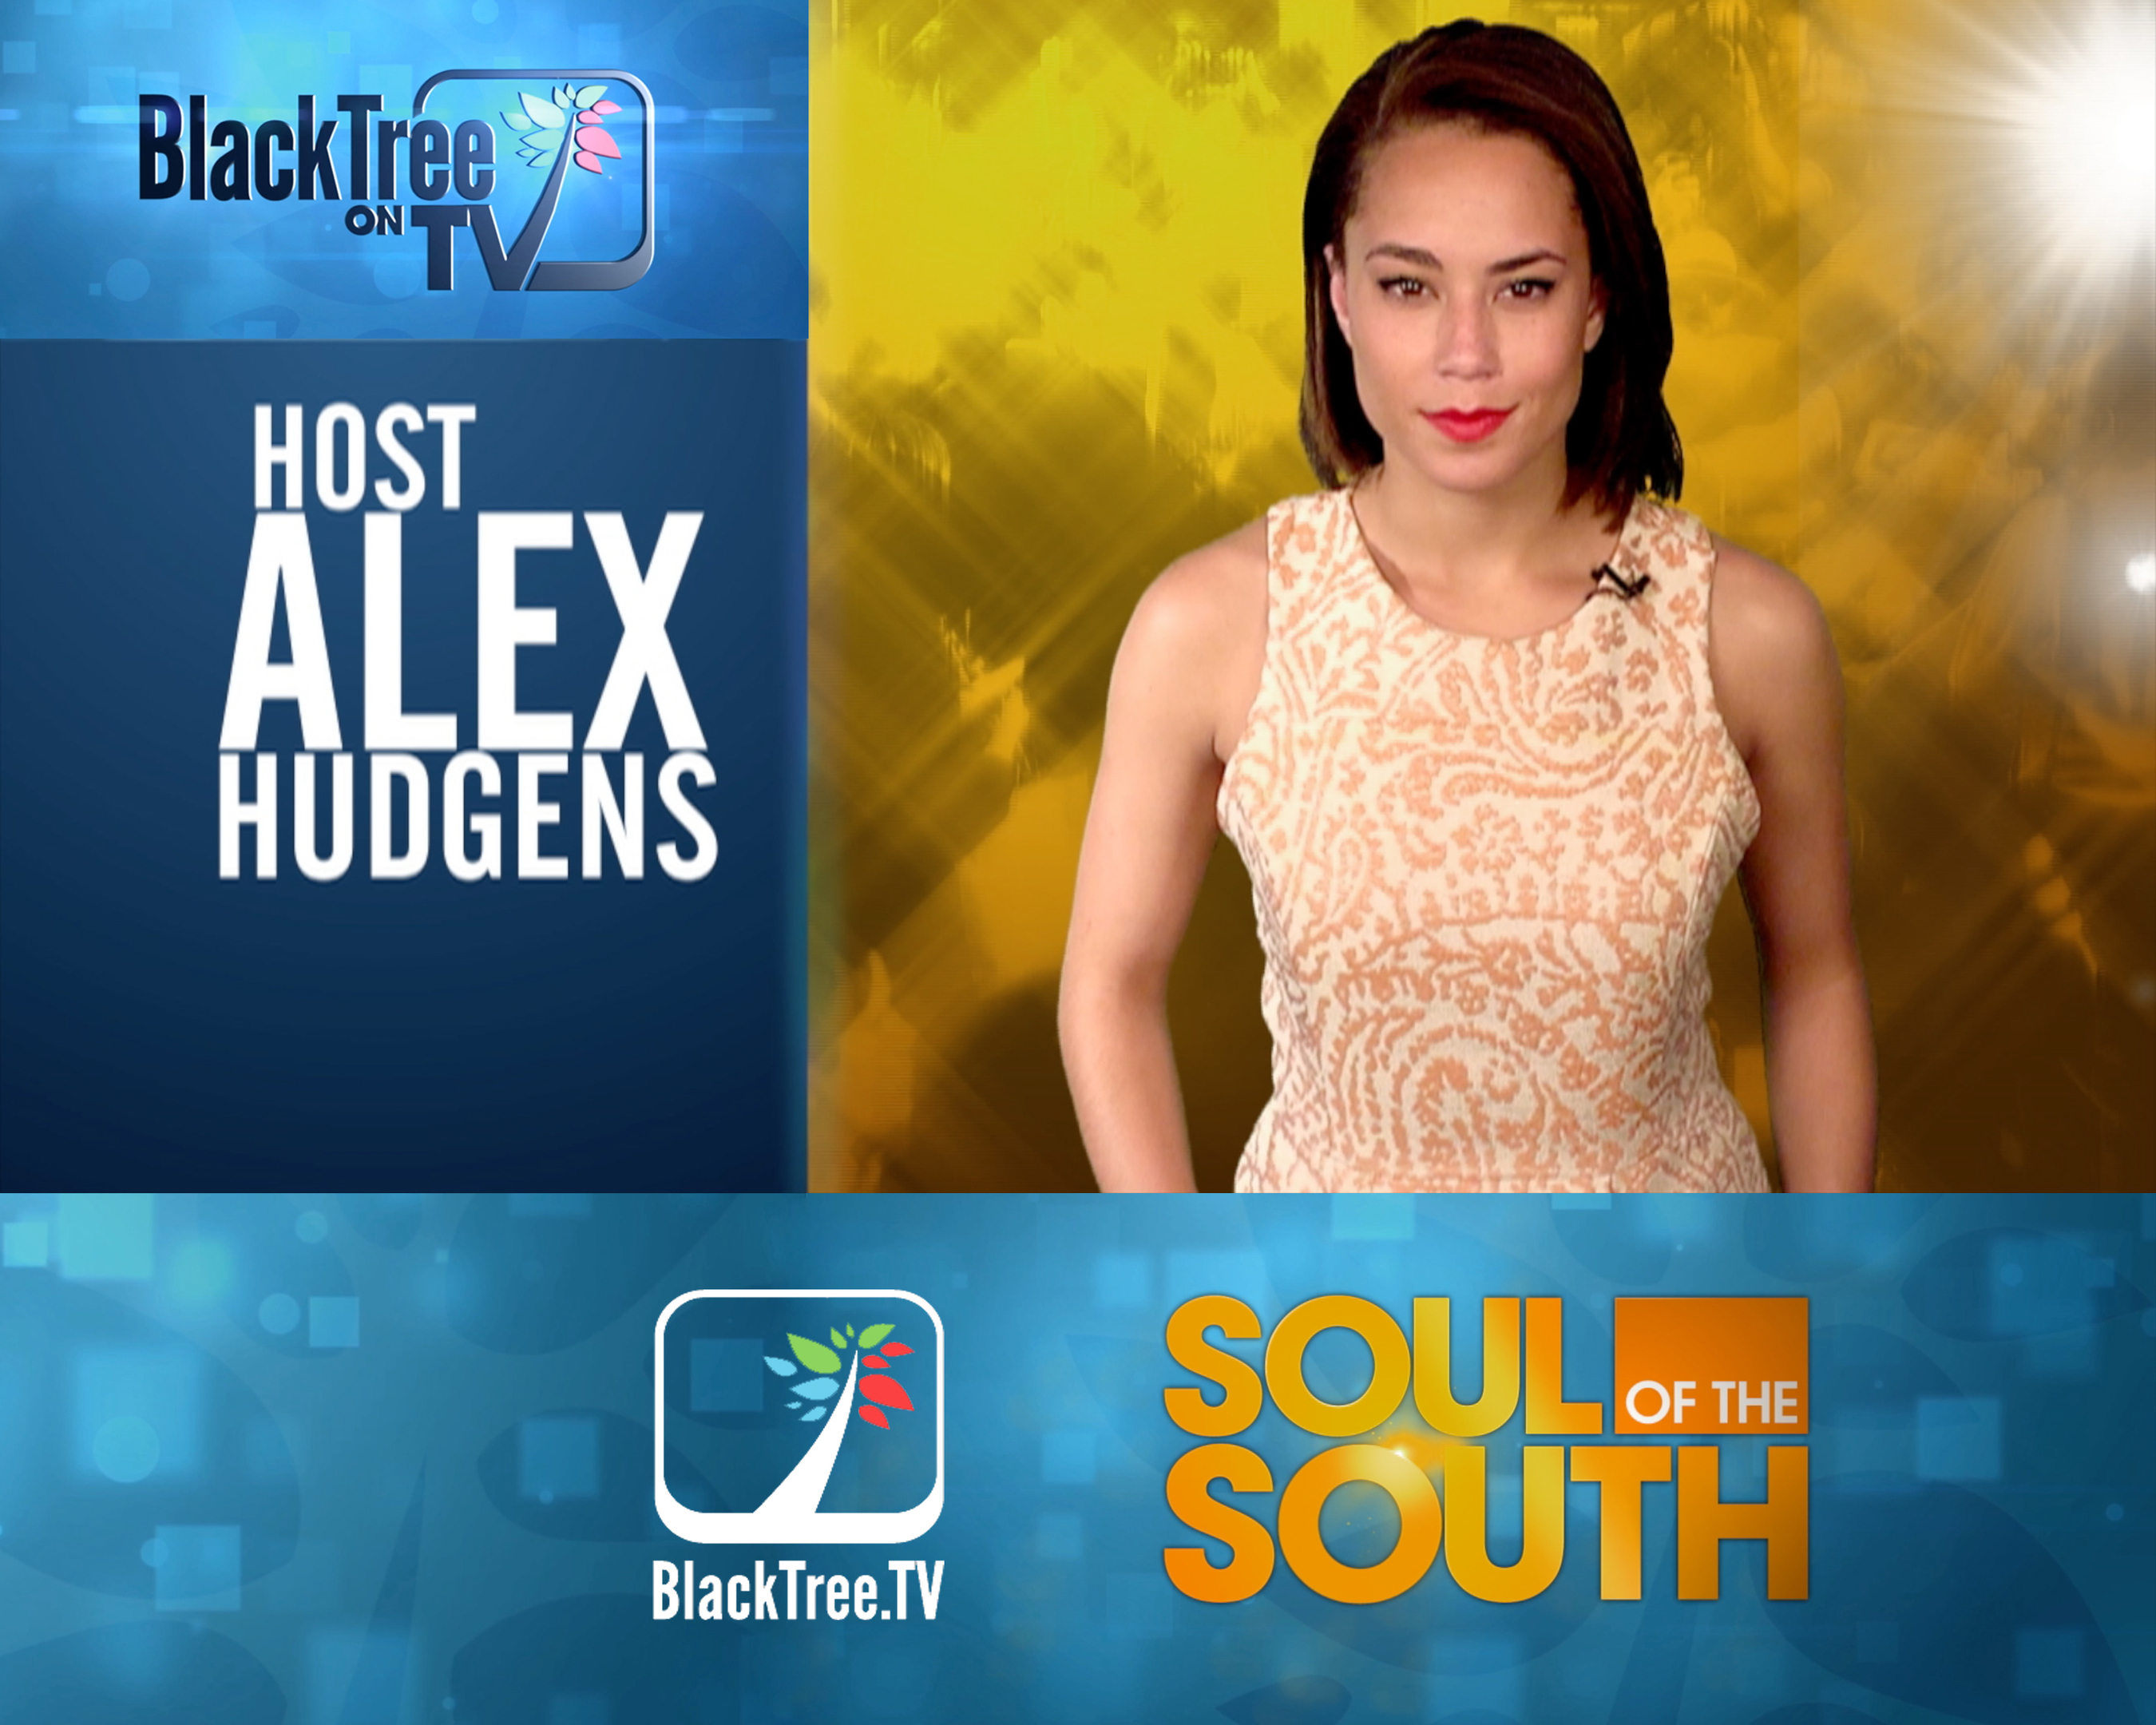 BlackTree TV, the No. 1 destination for African-Americans on YouTube and one of the largest online content providers for urban entertainment and information, today announced the premiere of a TV network program on Soul of the South Network. Hosted by Alex Hudgens, ‘BlackTree on TV’ marks the first time an urban YouTube channel has launched a daily national original program.  The half-hour series will deliver Hollywood news and information using the best of BlackTree TV’s current coverage and deep library of interviews, red carpets, behind-the-scenes and set visits to give a weekly rundown on the best Hollywood has to offer. (PRNewsFoto/BlackTree TV)